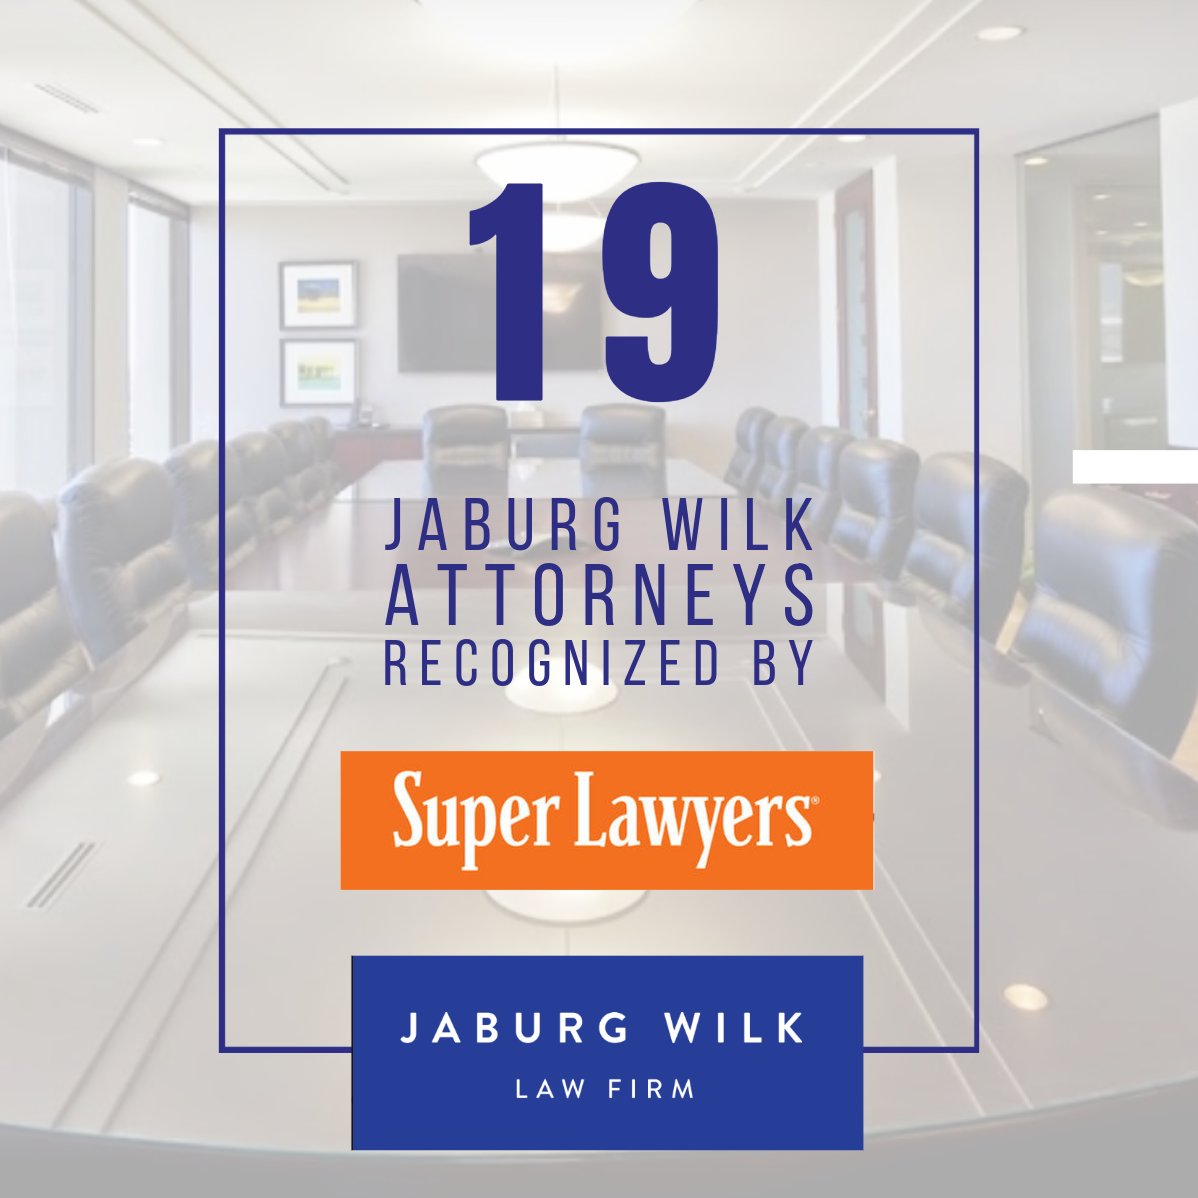 🌟 Proud to announce 19 Jaburg Wilk attorneys are 2024 Southwest Super Lawyers & Rising Stars! Recognized among the top legal professionals in AZ for their expertise & dedication. Congratulations to all! 🏆👨‍⚖️👩‍⚖️ #JaburgWilk #SuperLawyers #RisingStars #PhoenixLaw